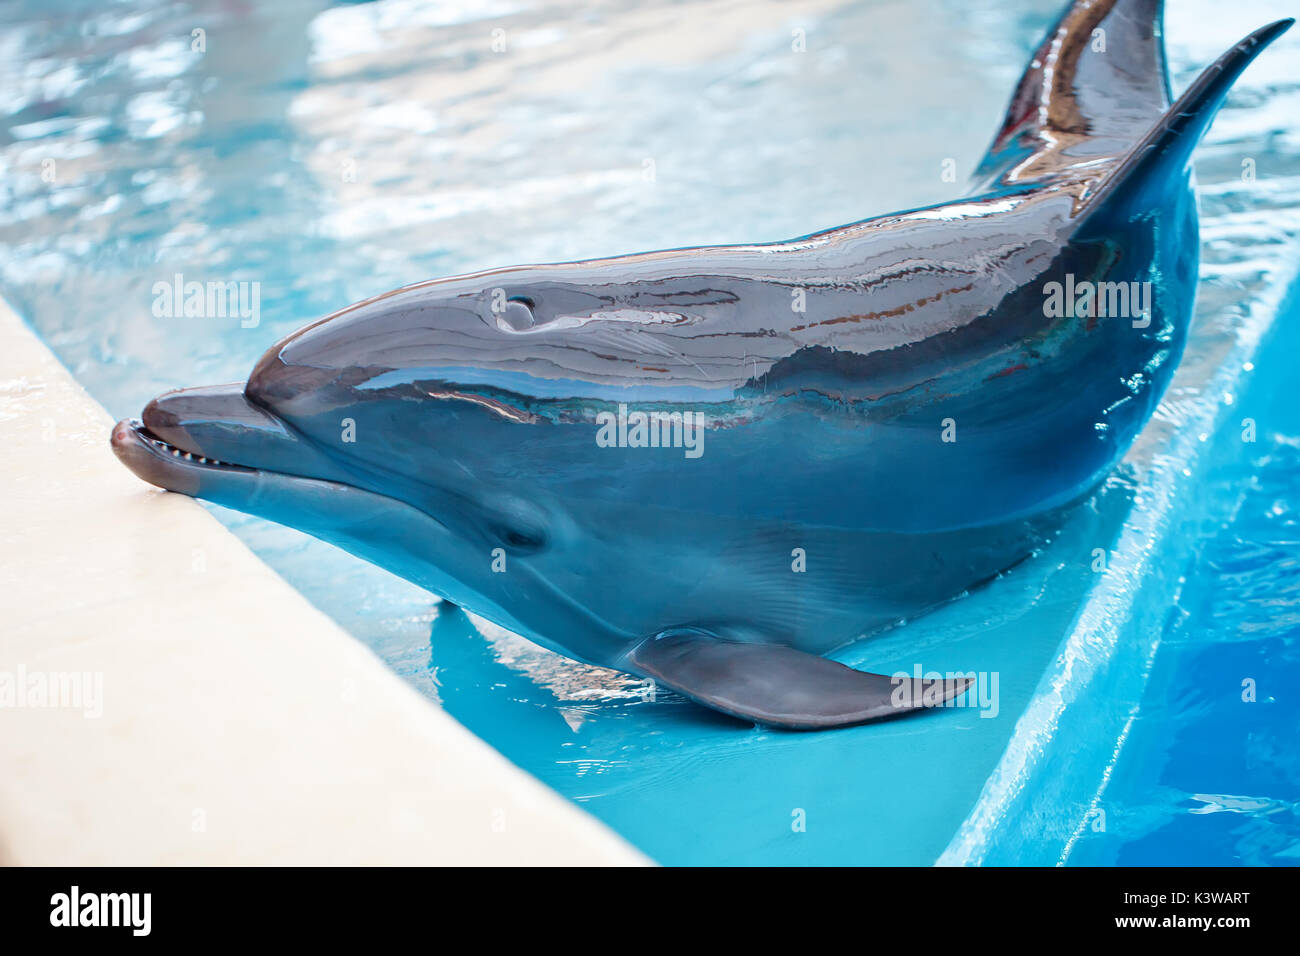 A young Dolphin is smiling and playing in the pool. Stock Photo